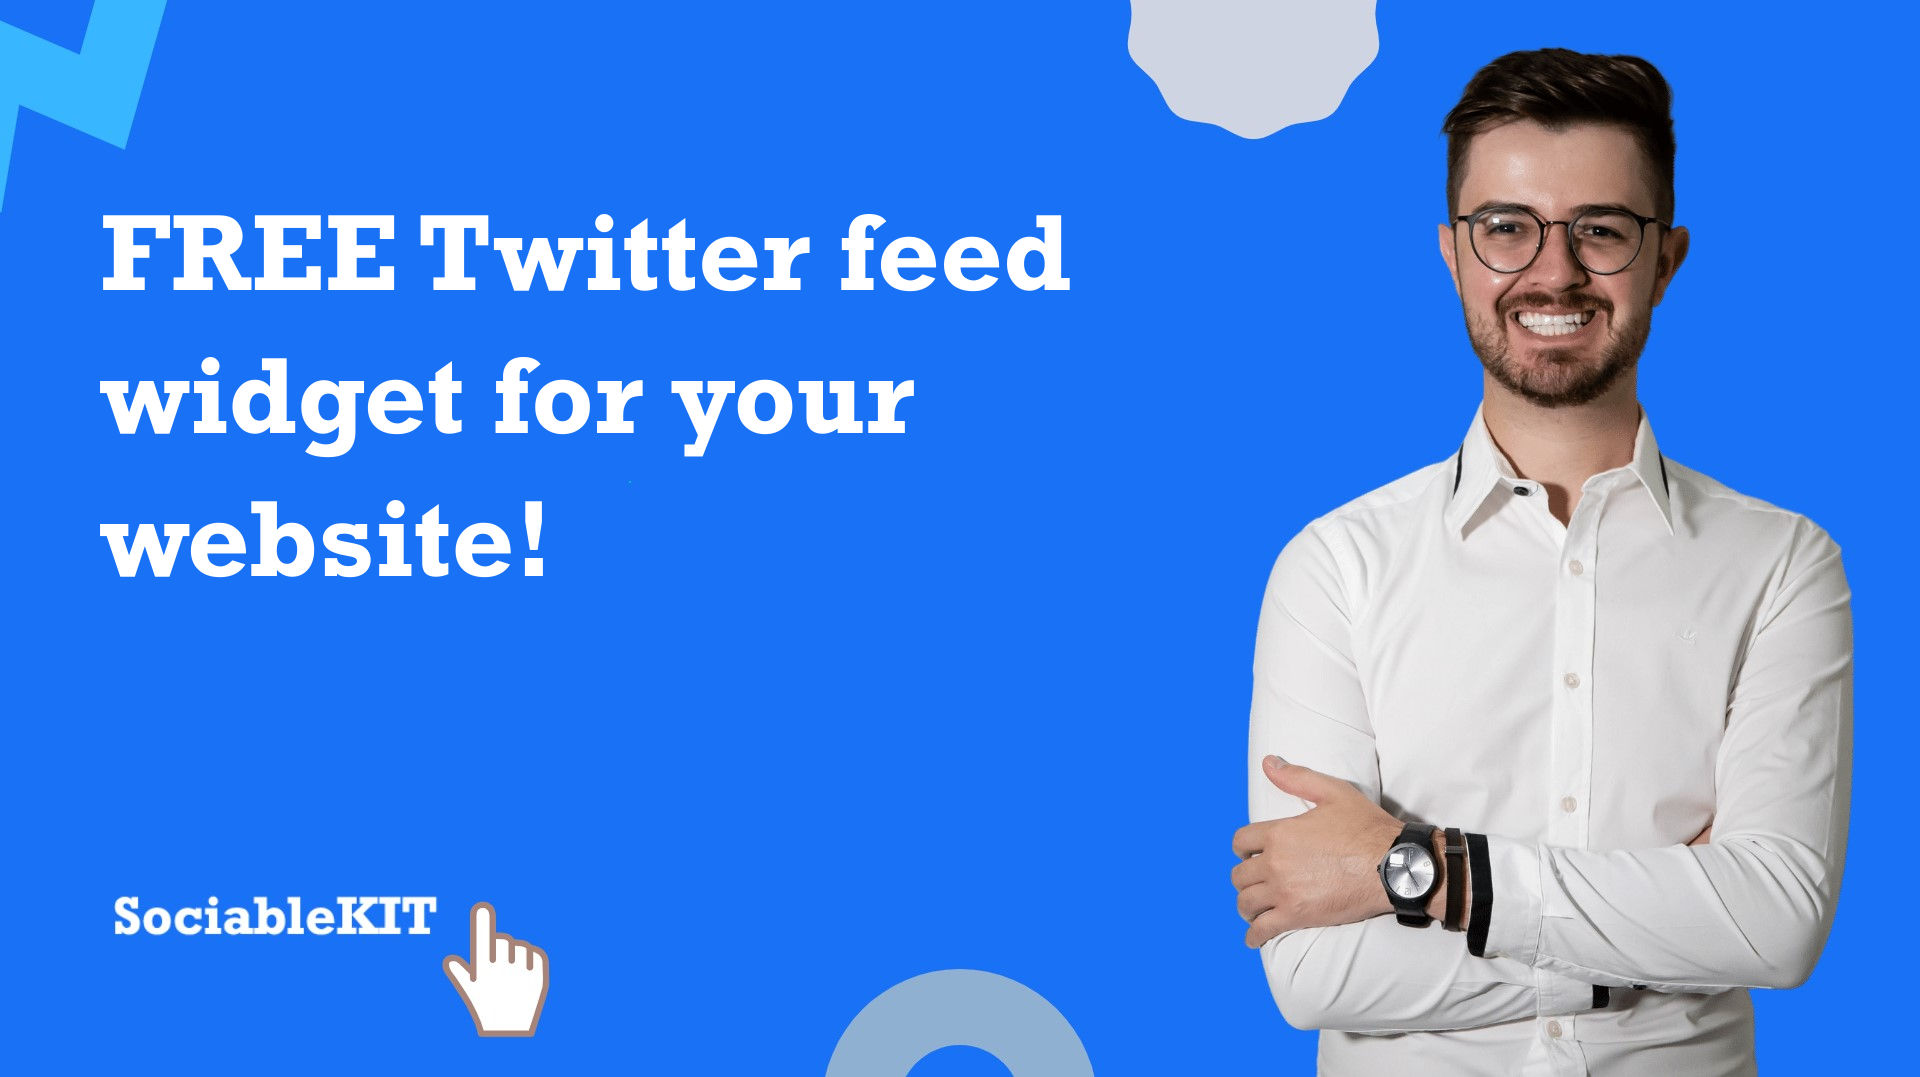 Free Twitter feed widget for your website